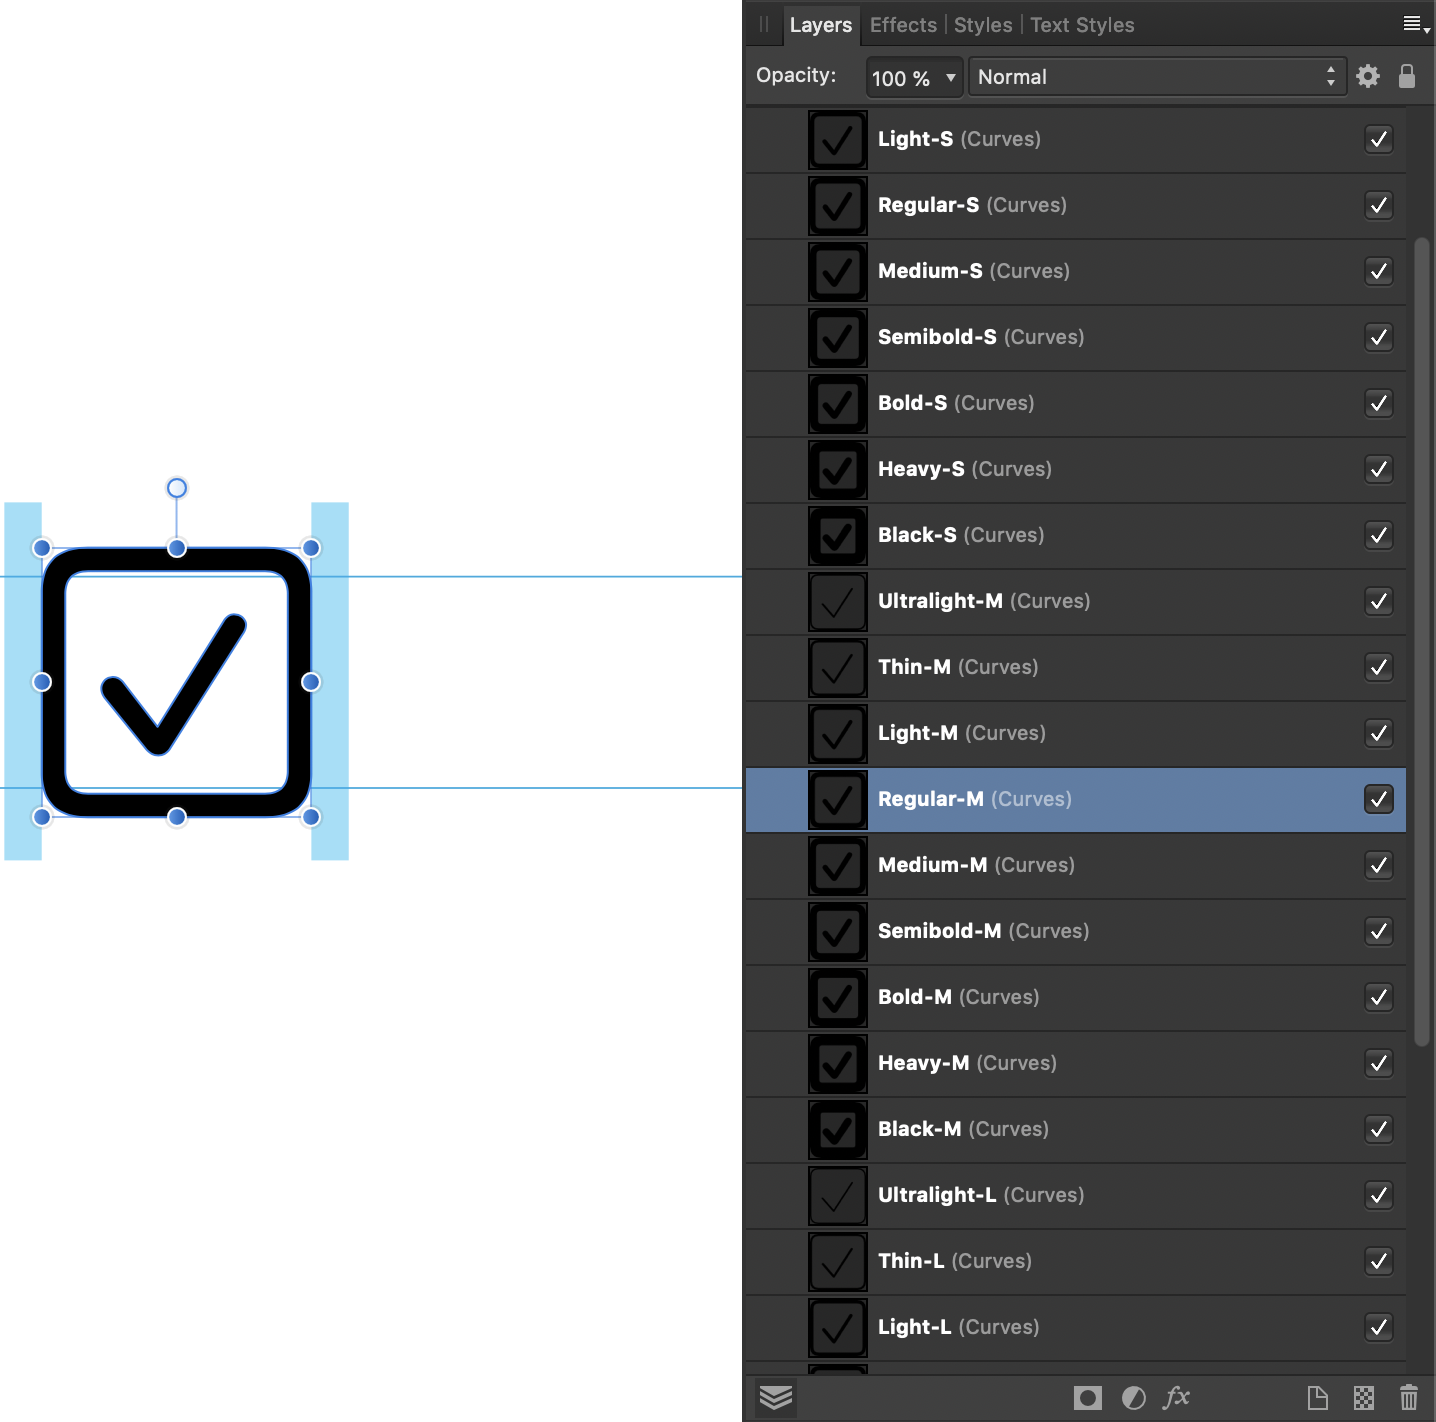 The Regular-M layer selected in Affinity Designer.